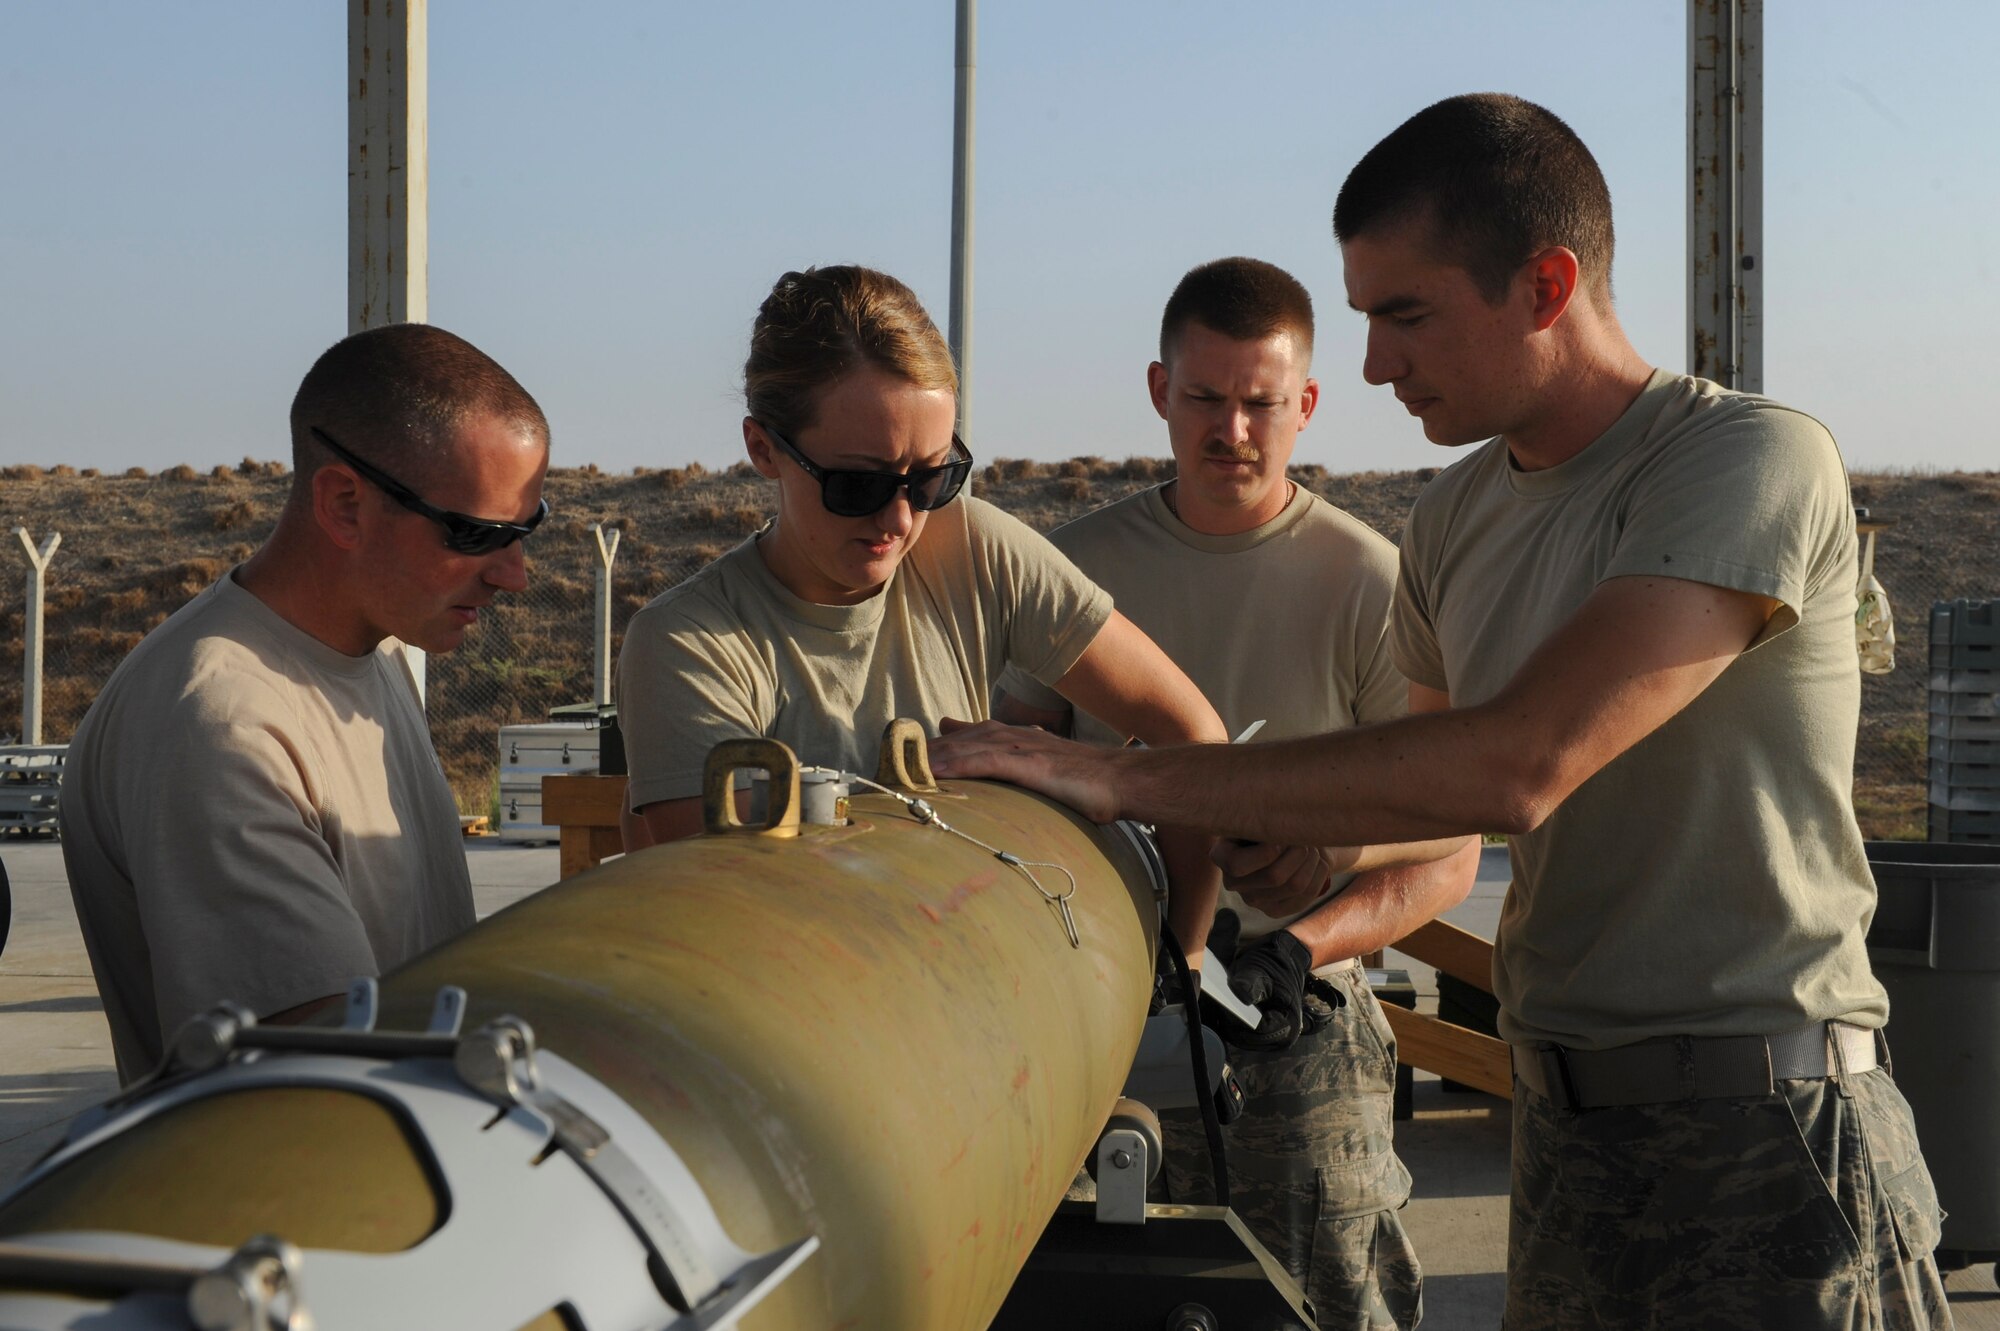 U.S. Air Force Airmen assigned to the 447th Expeditionary Aircraft Maintenance Squadron, attach the tail section of a GBU-54 Laser Joint Direct Attack Munition bomb Oct. 29, 2016, at Incirlik Air Base, Turkey. The Airmen are all Munitions Systems specialists, responsible for assembling and processing of munitions. (U.S. Air Force photo by Airman 1st Class Devin M. Rumbaugh)